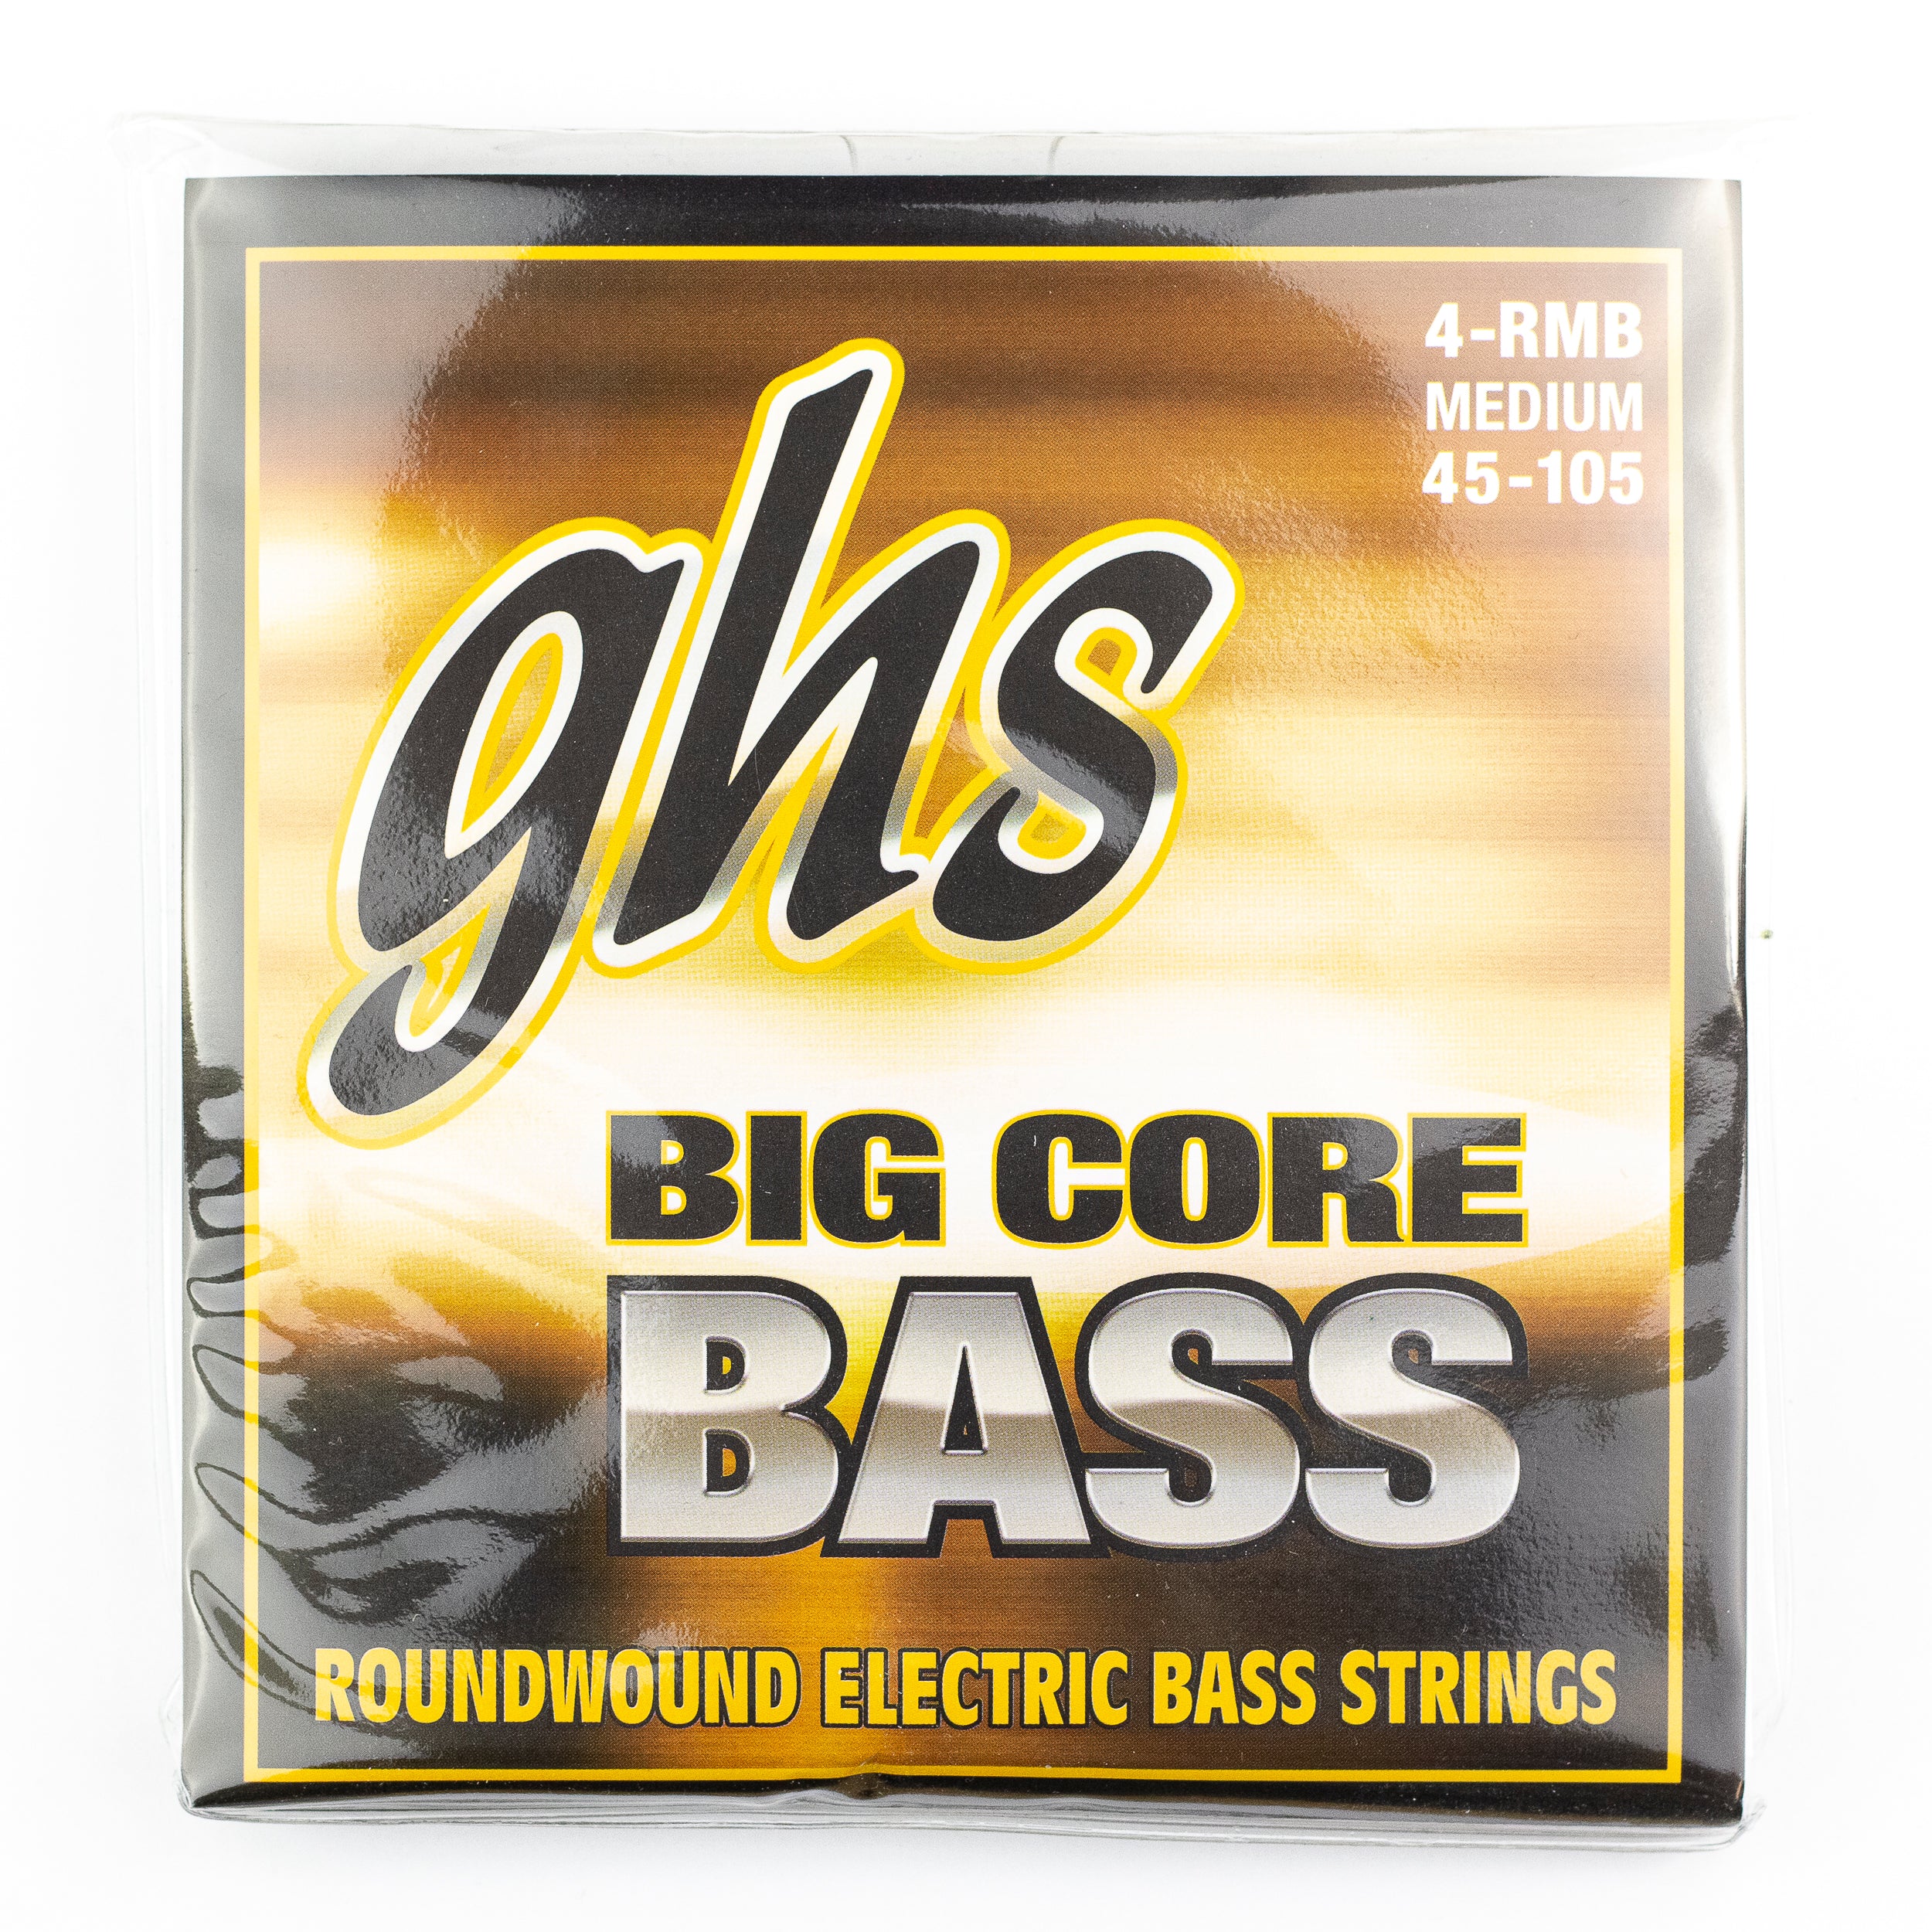 GHS Big Core Bass Nickel-Iron Wound 45-105 Bass Guitar Strings, Long Scale [4RMB]